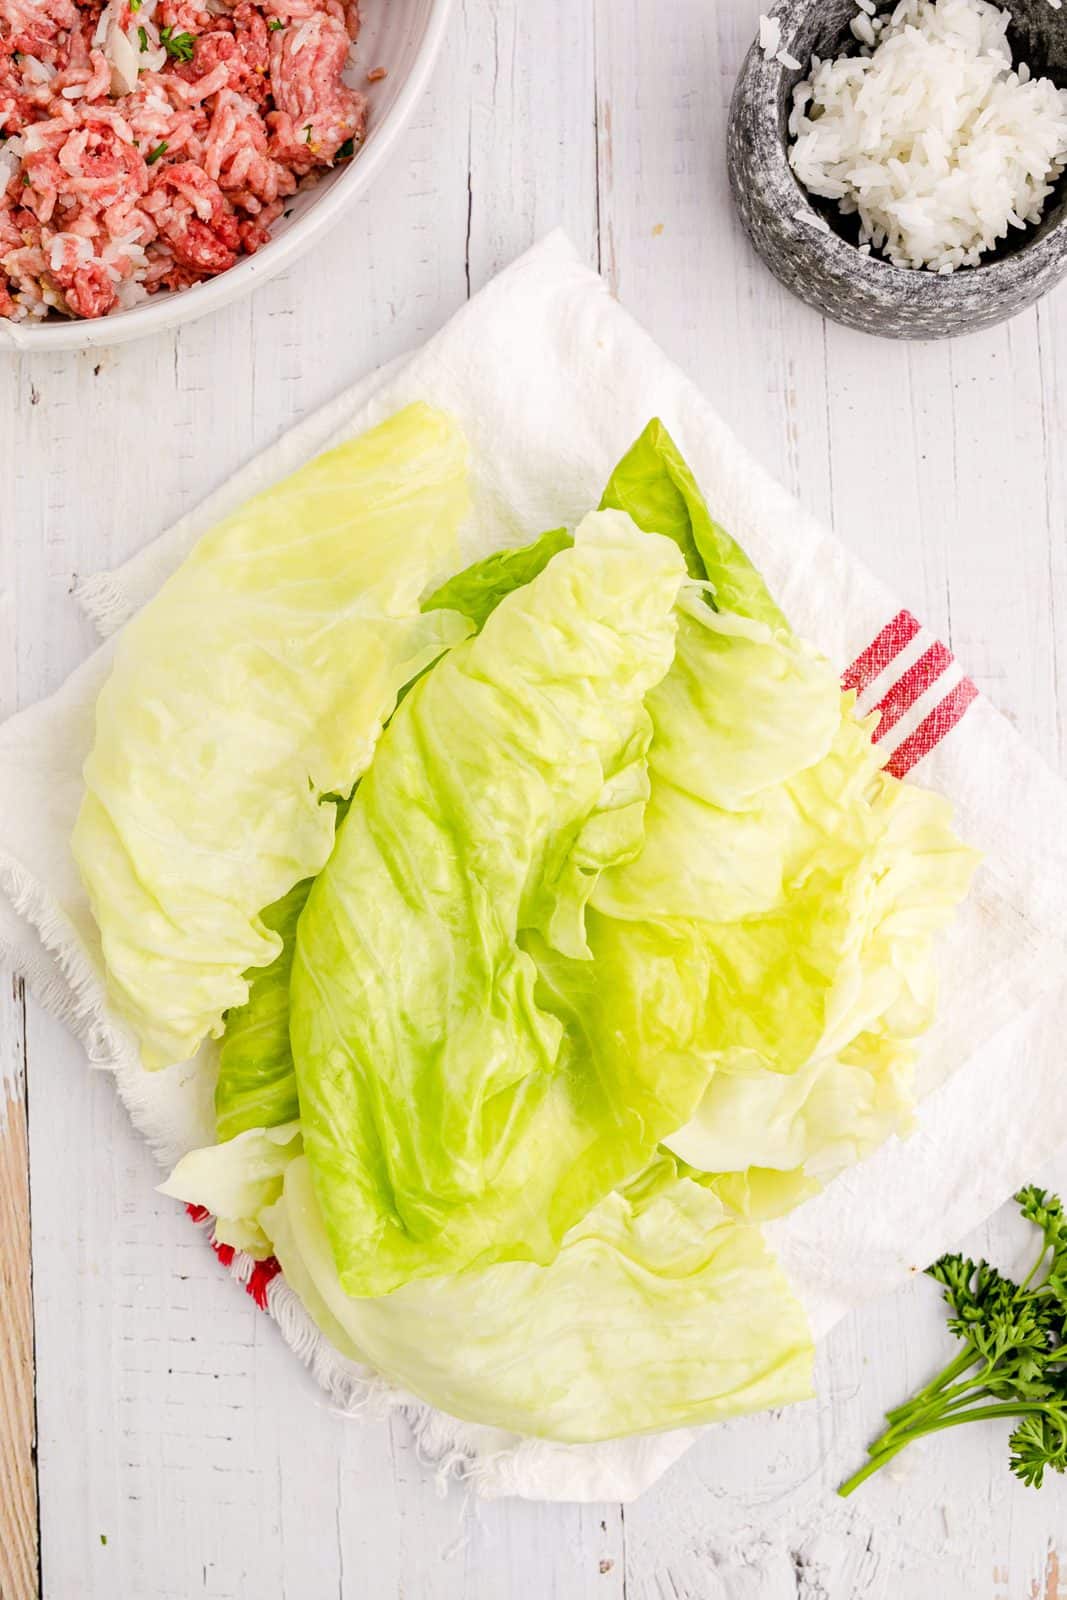 Cabbage leaves being dried on paper towel.